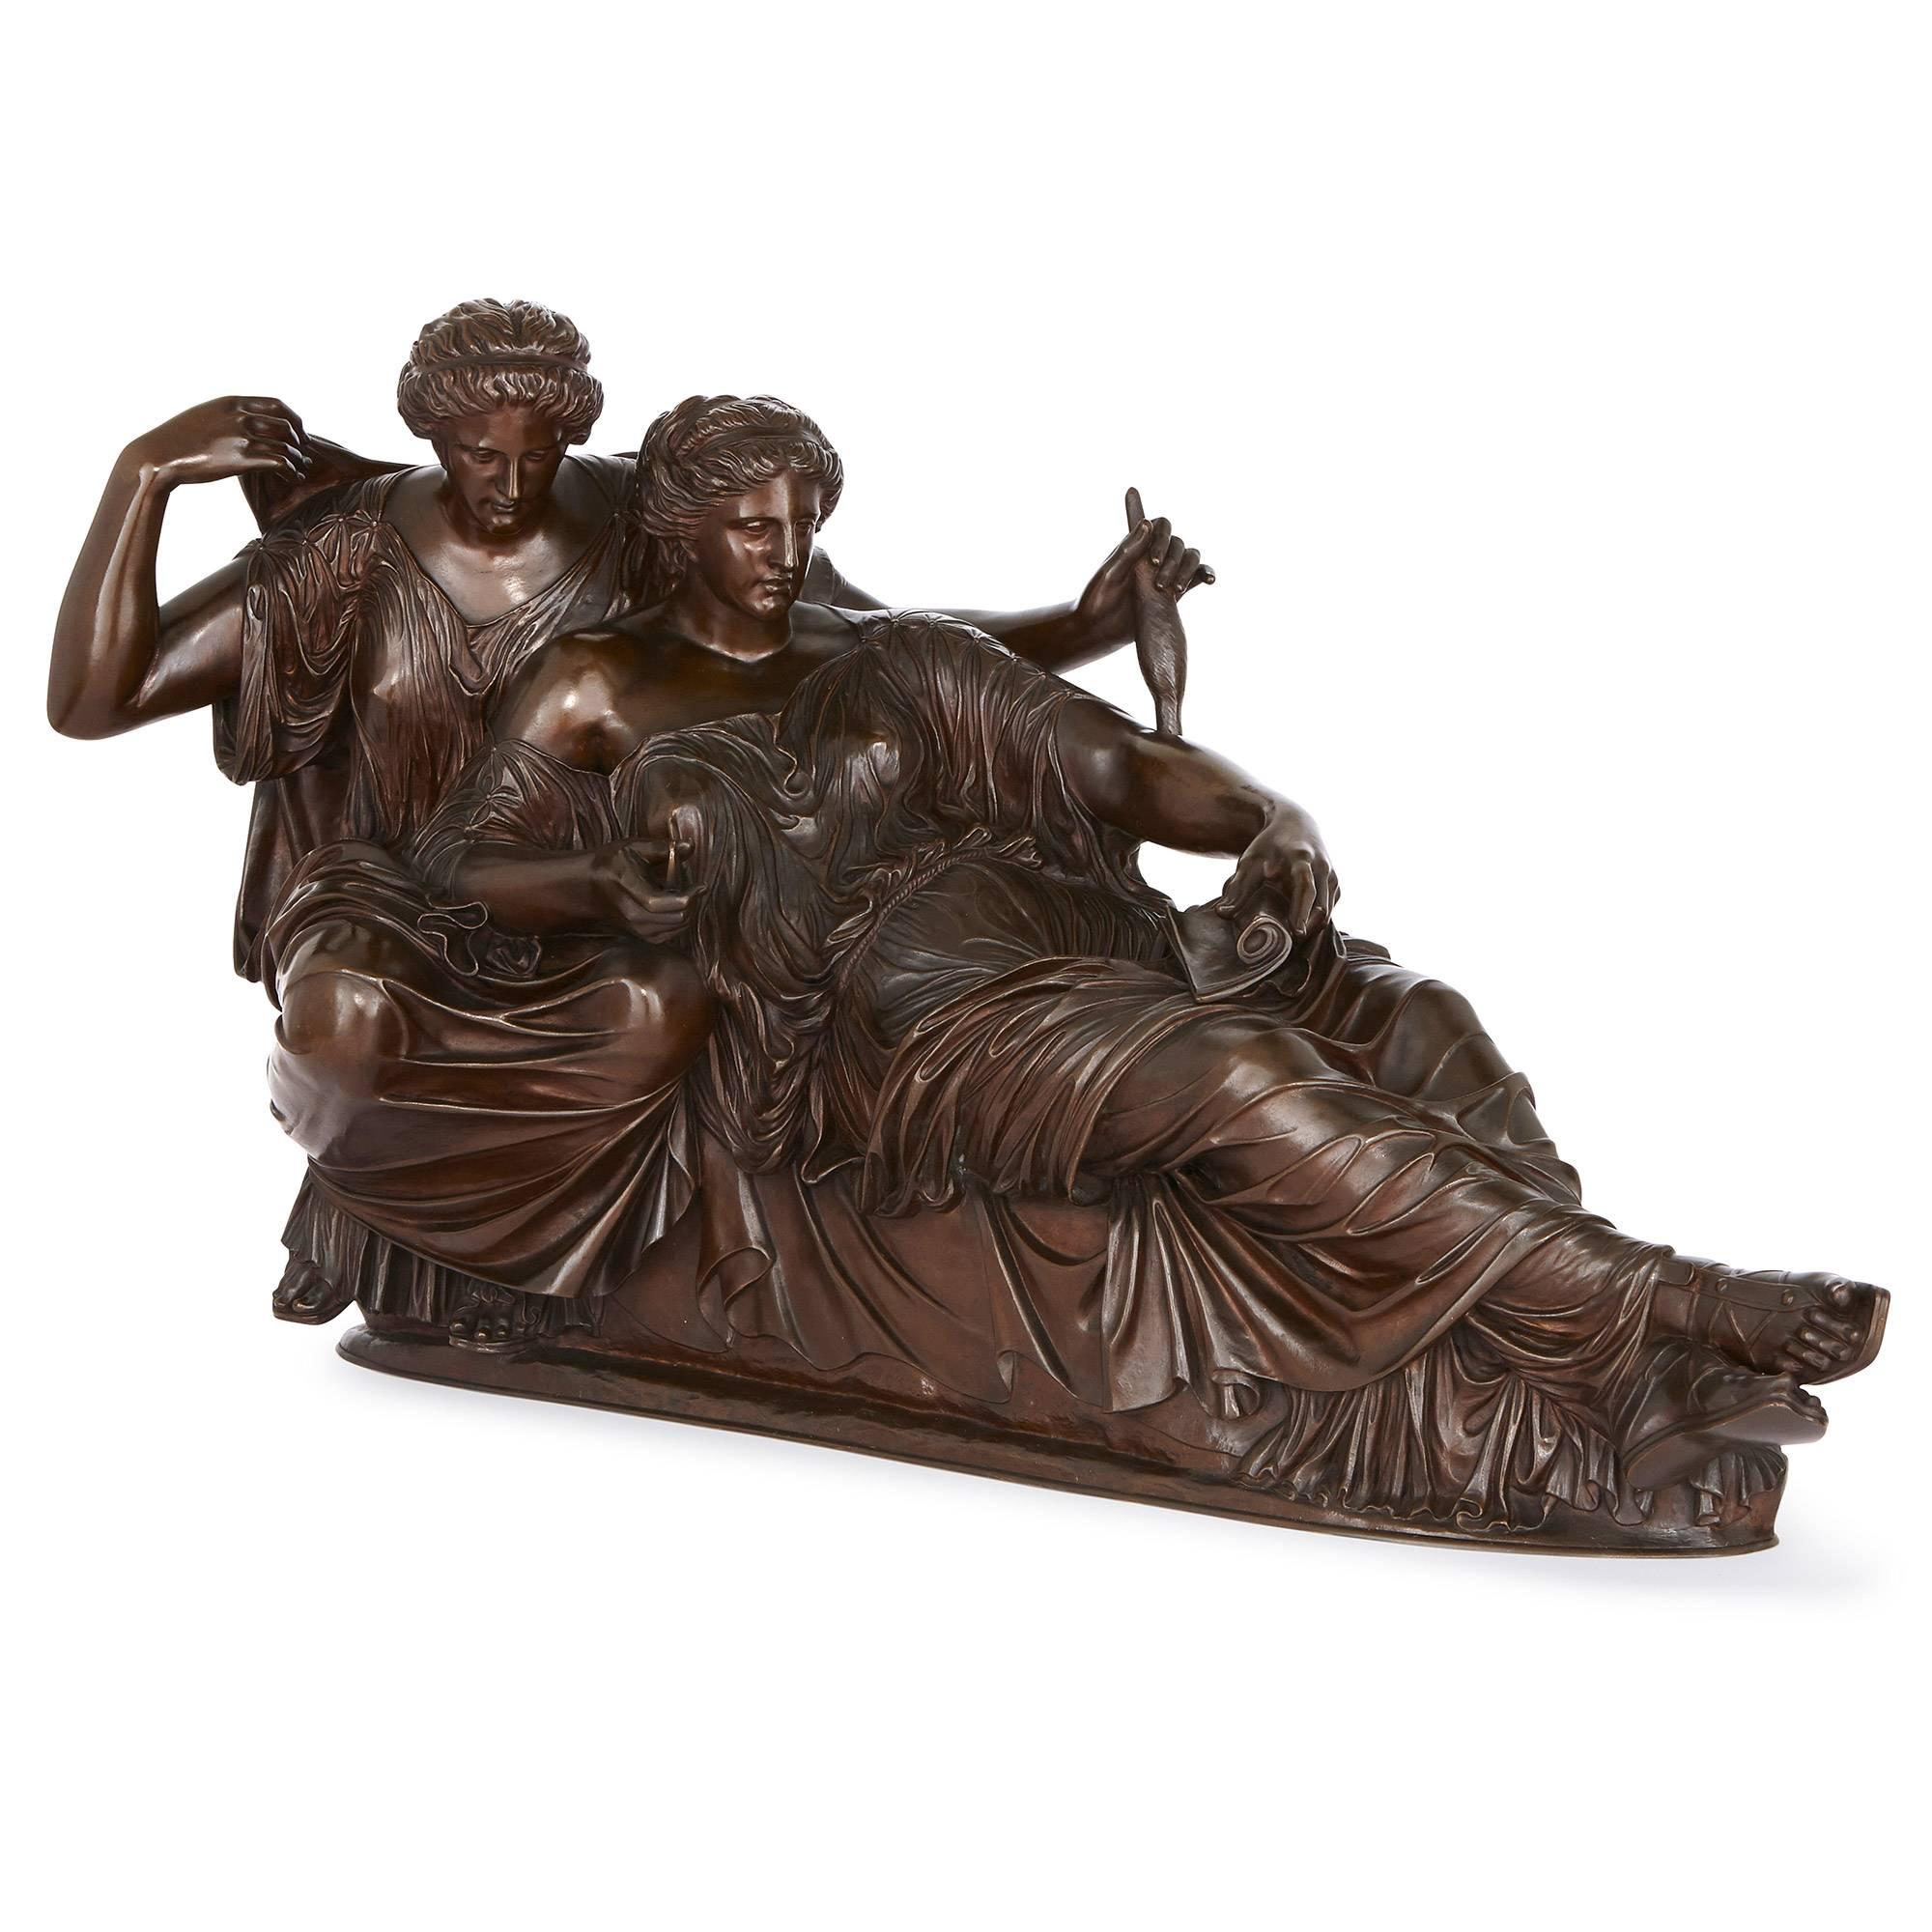 This fine and large bronze group is beautifully cast by the Parisian workshop of Ferdinand Barbedienne, perhaps the most prominent foundry of the late 19th century. The work is based on an ancient sculpture, formerly in the Parthenon, and currently